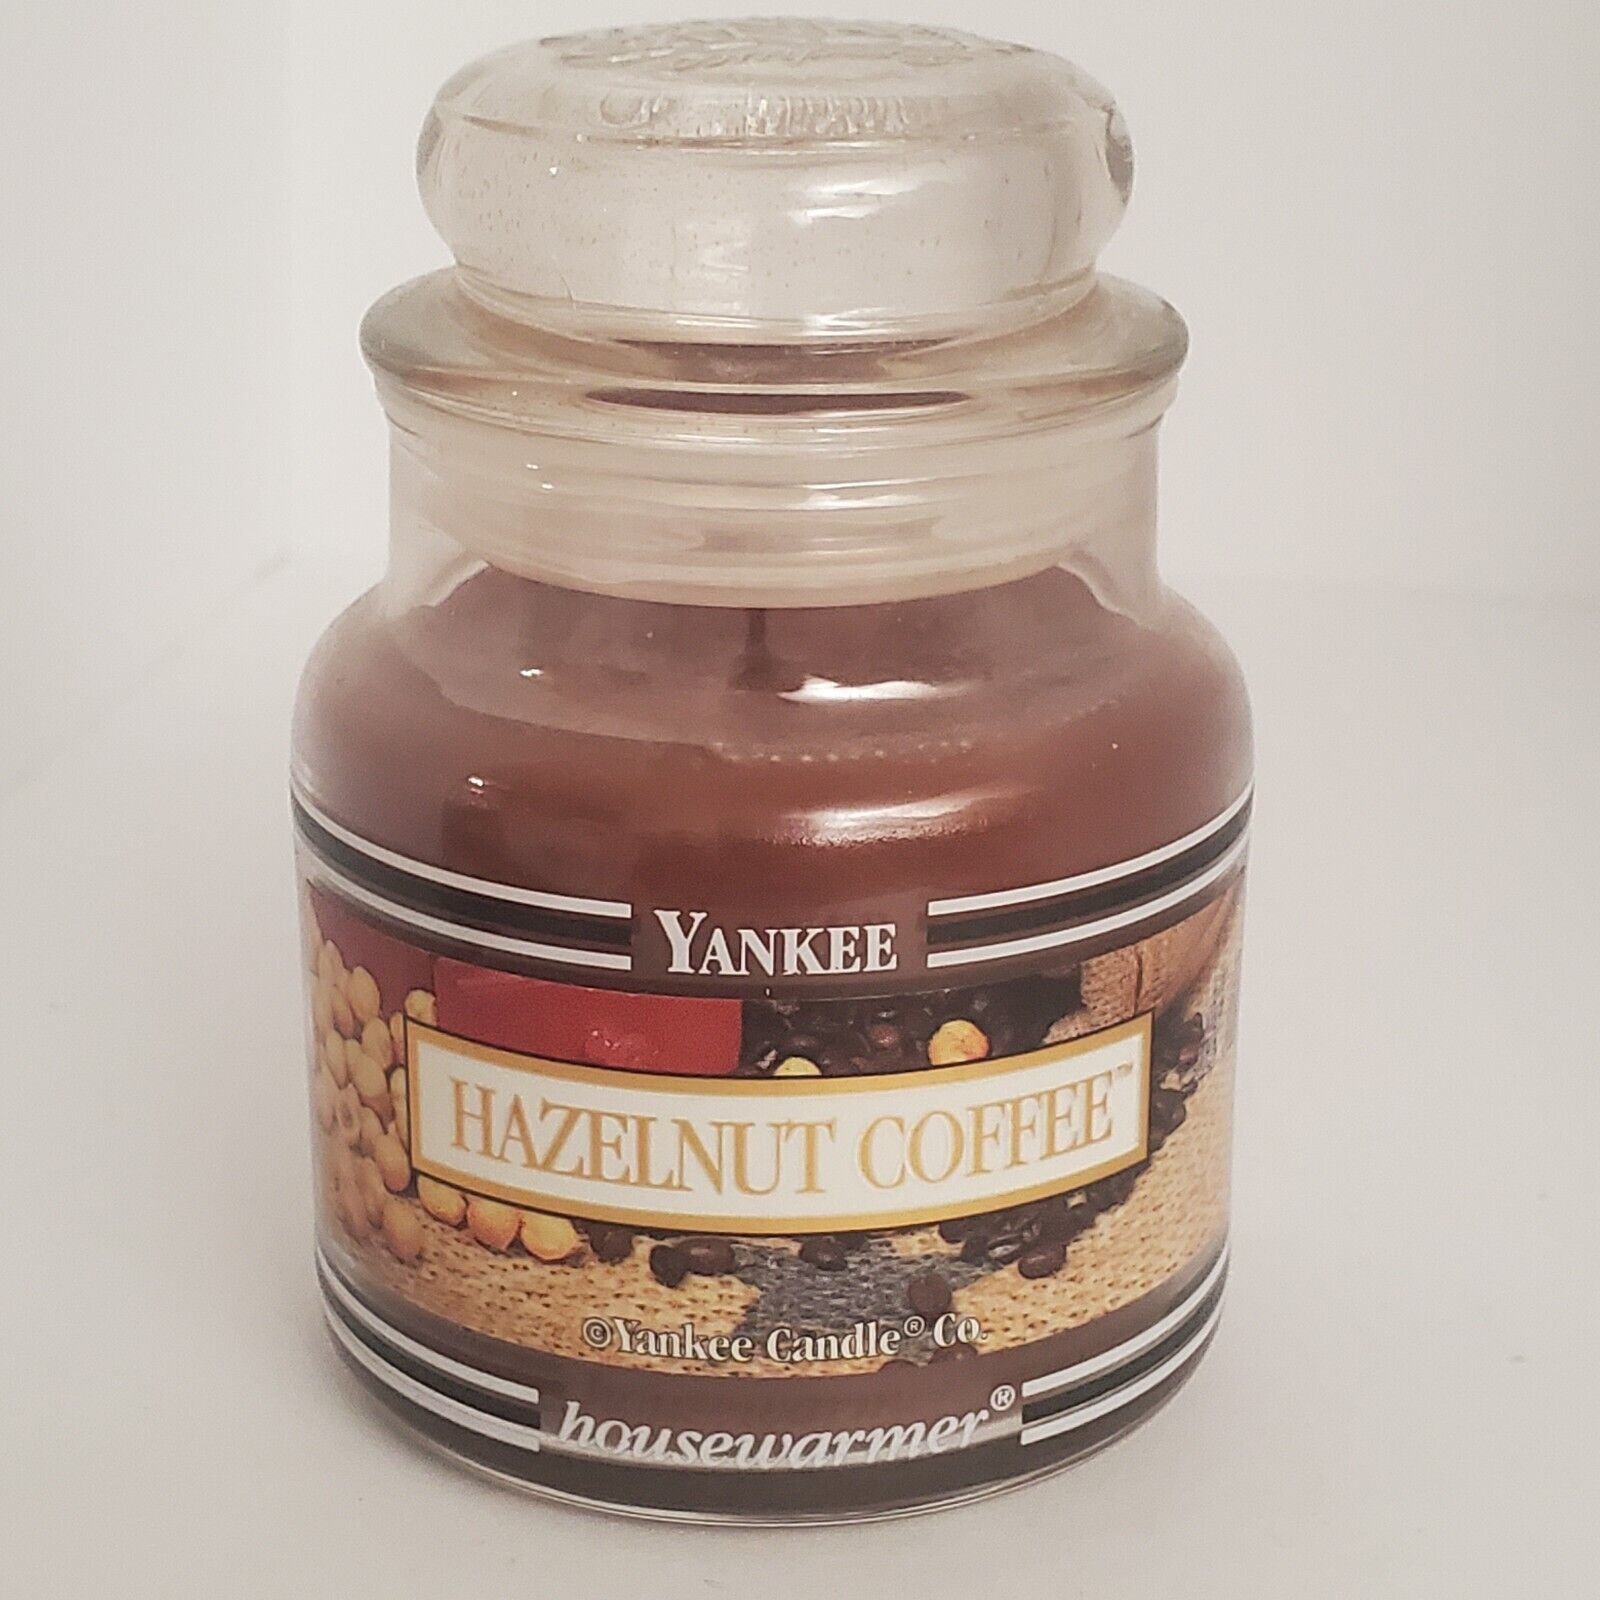 Primary image for Yankee Candle Hazelnut coffee Small Jar 3.7 Oz Single Wick Retired Scent New